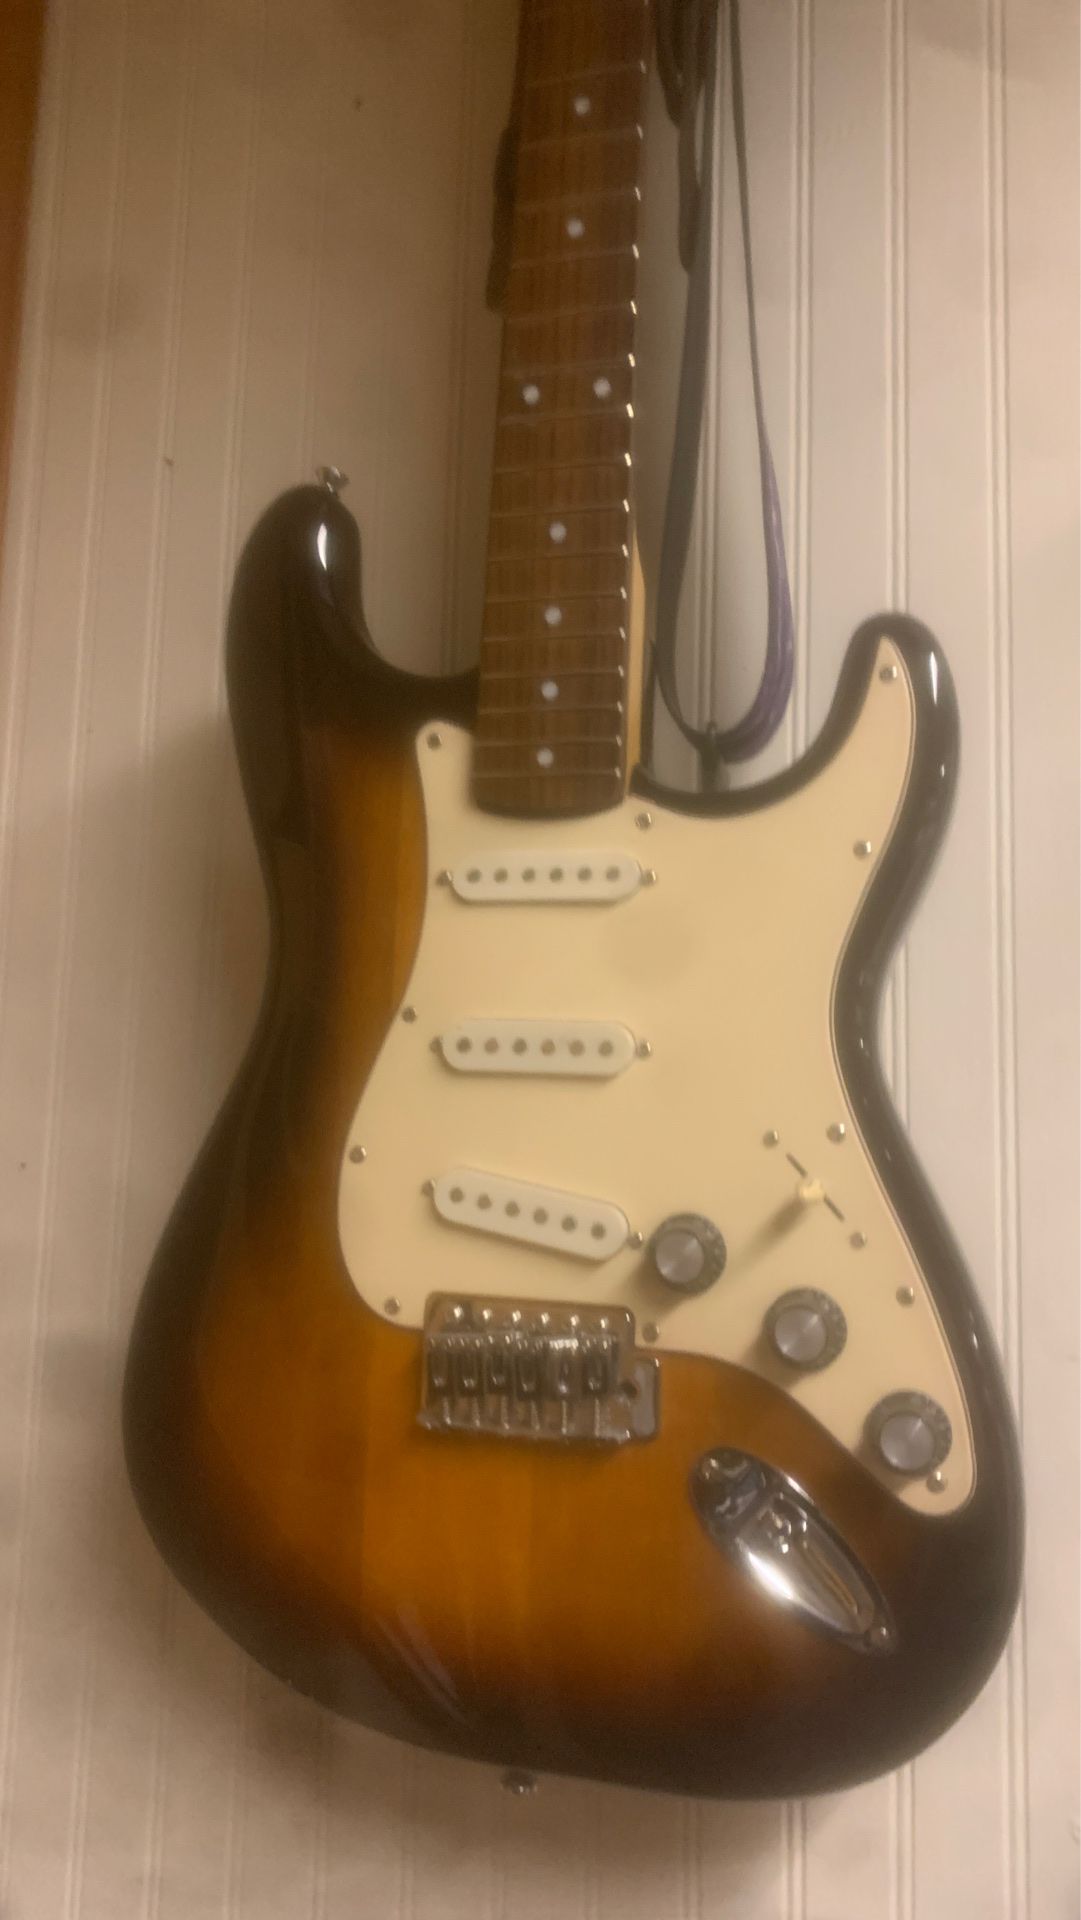 Fender squier put together with all original squier parts but top line electronics